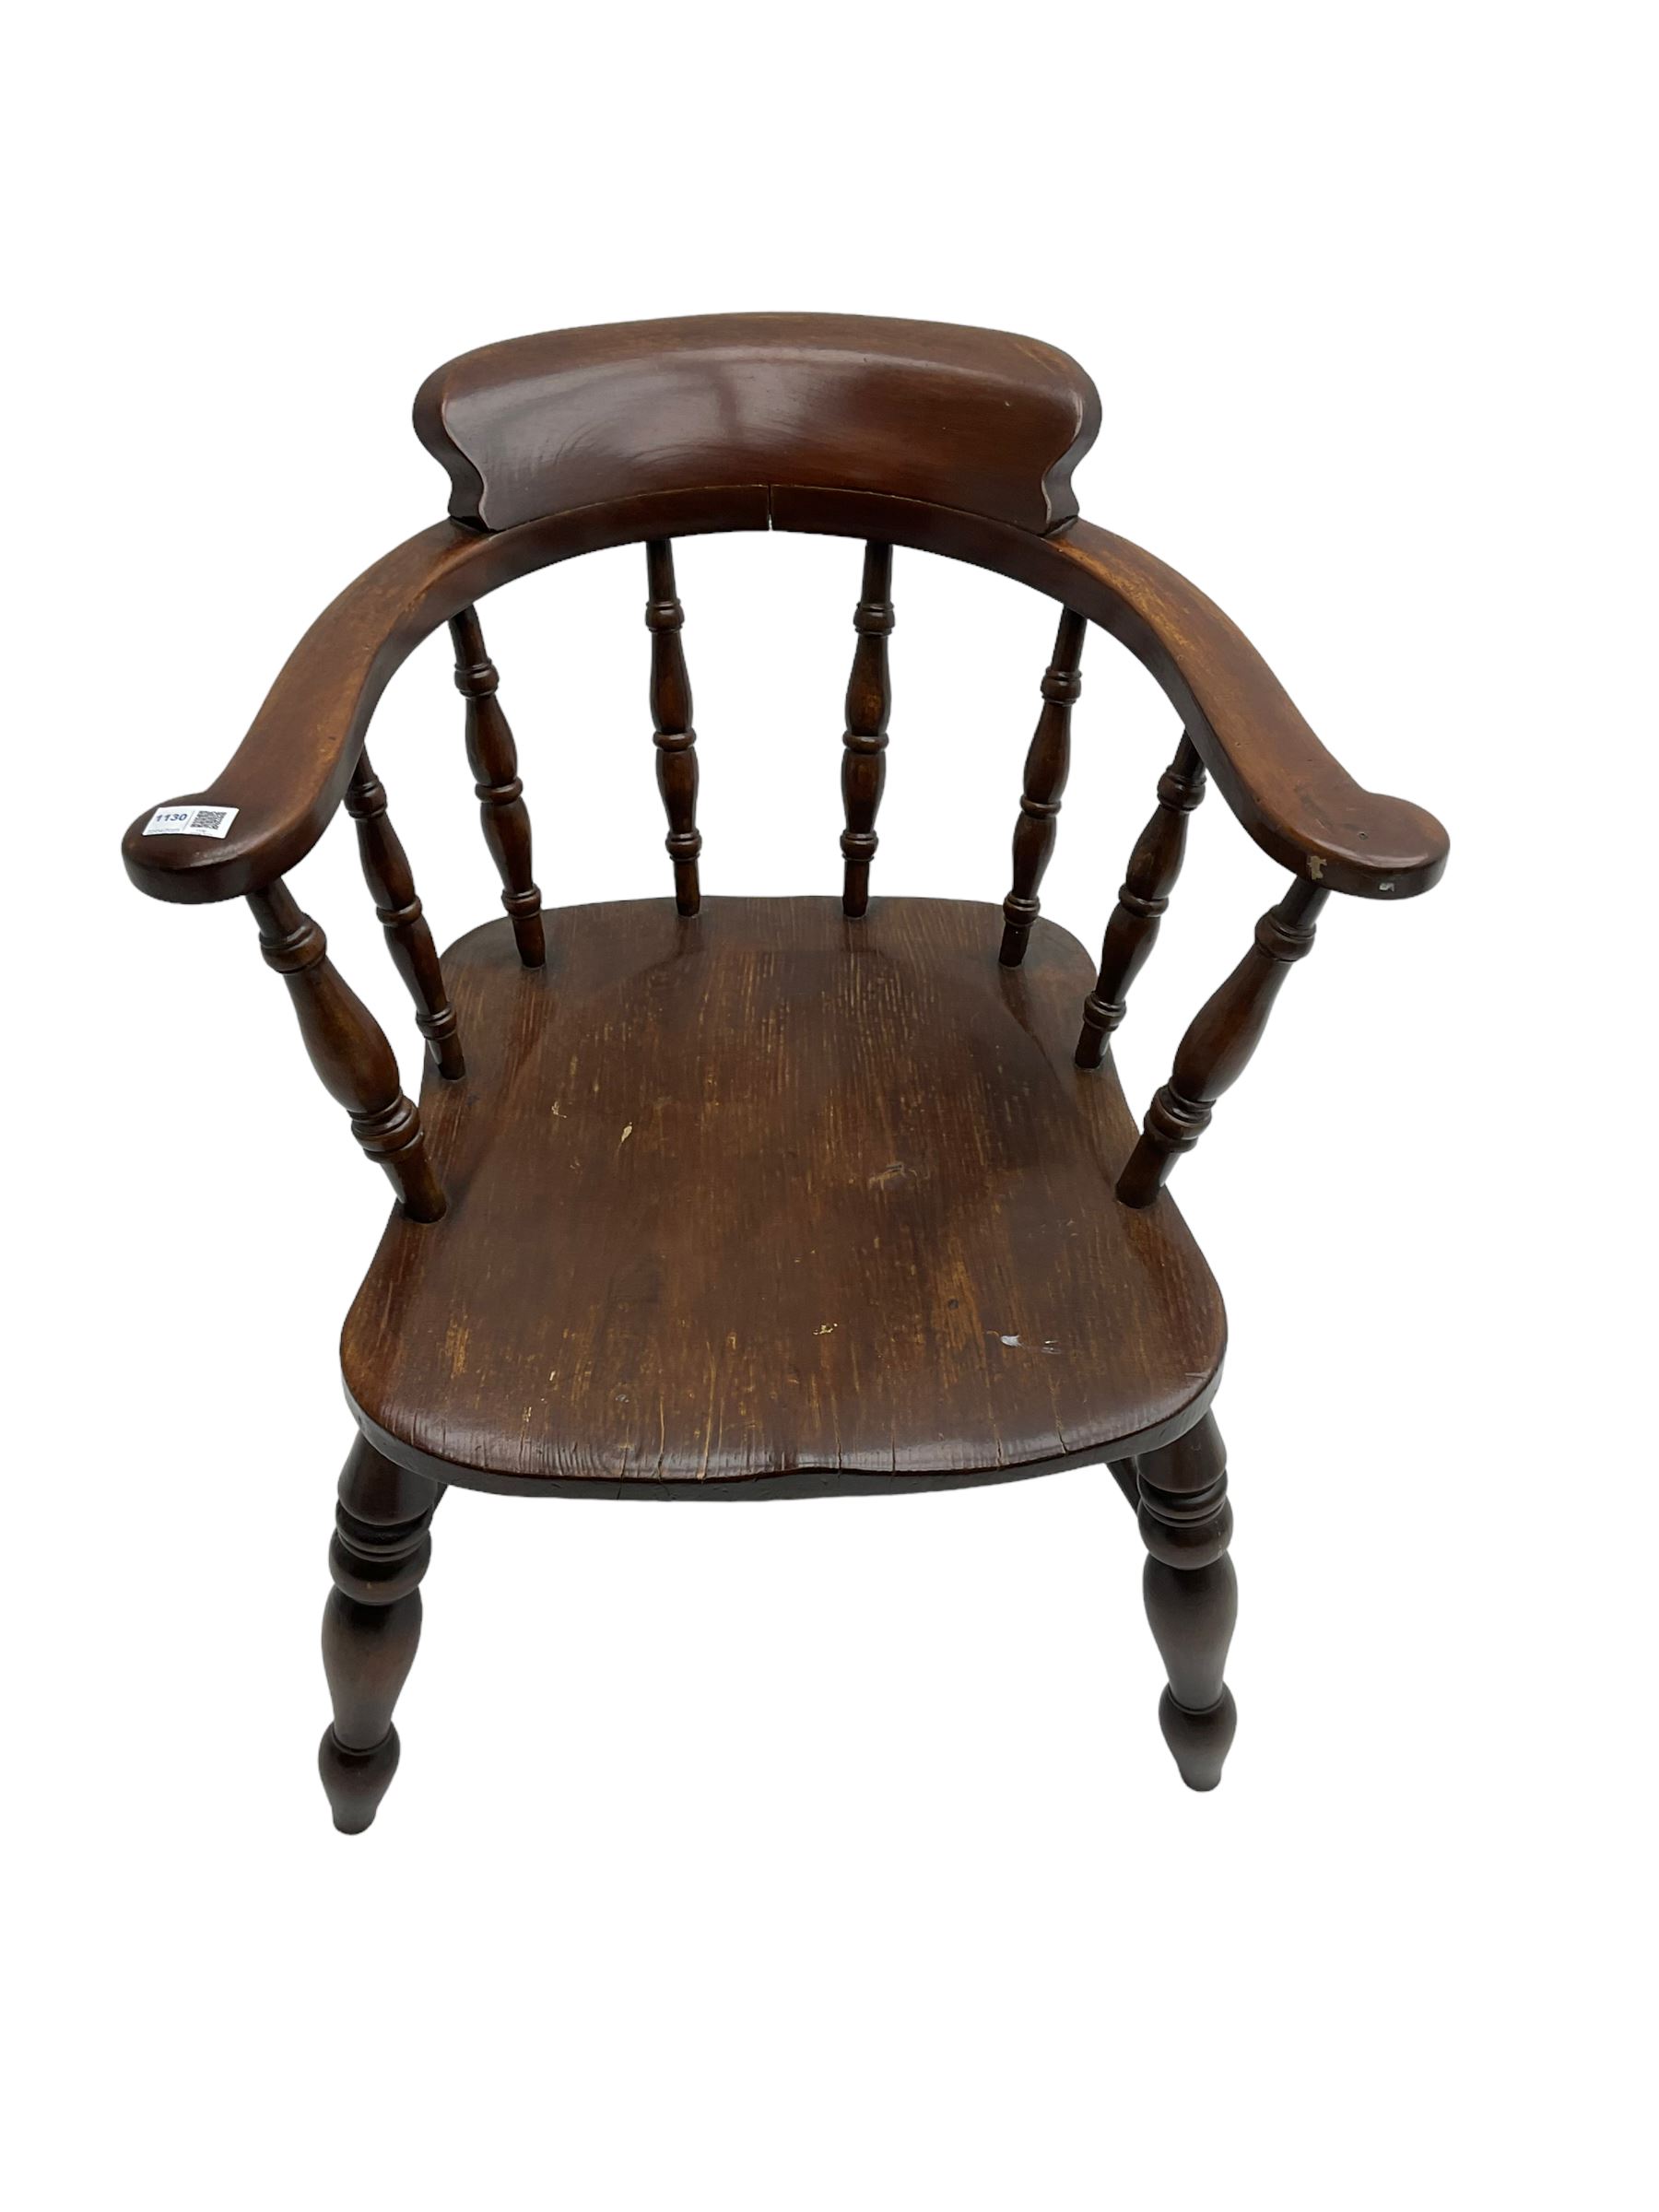 20th century elm and beech Captain's elbow chair - Image 2 of 6